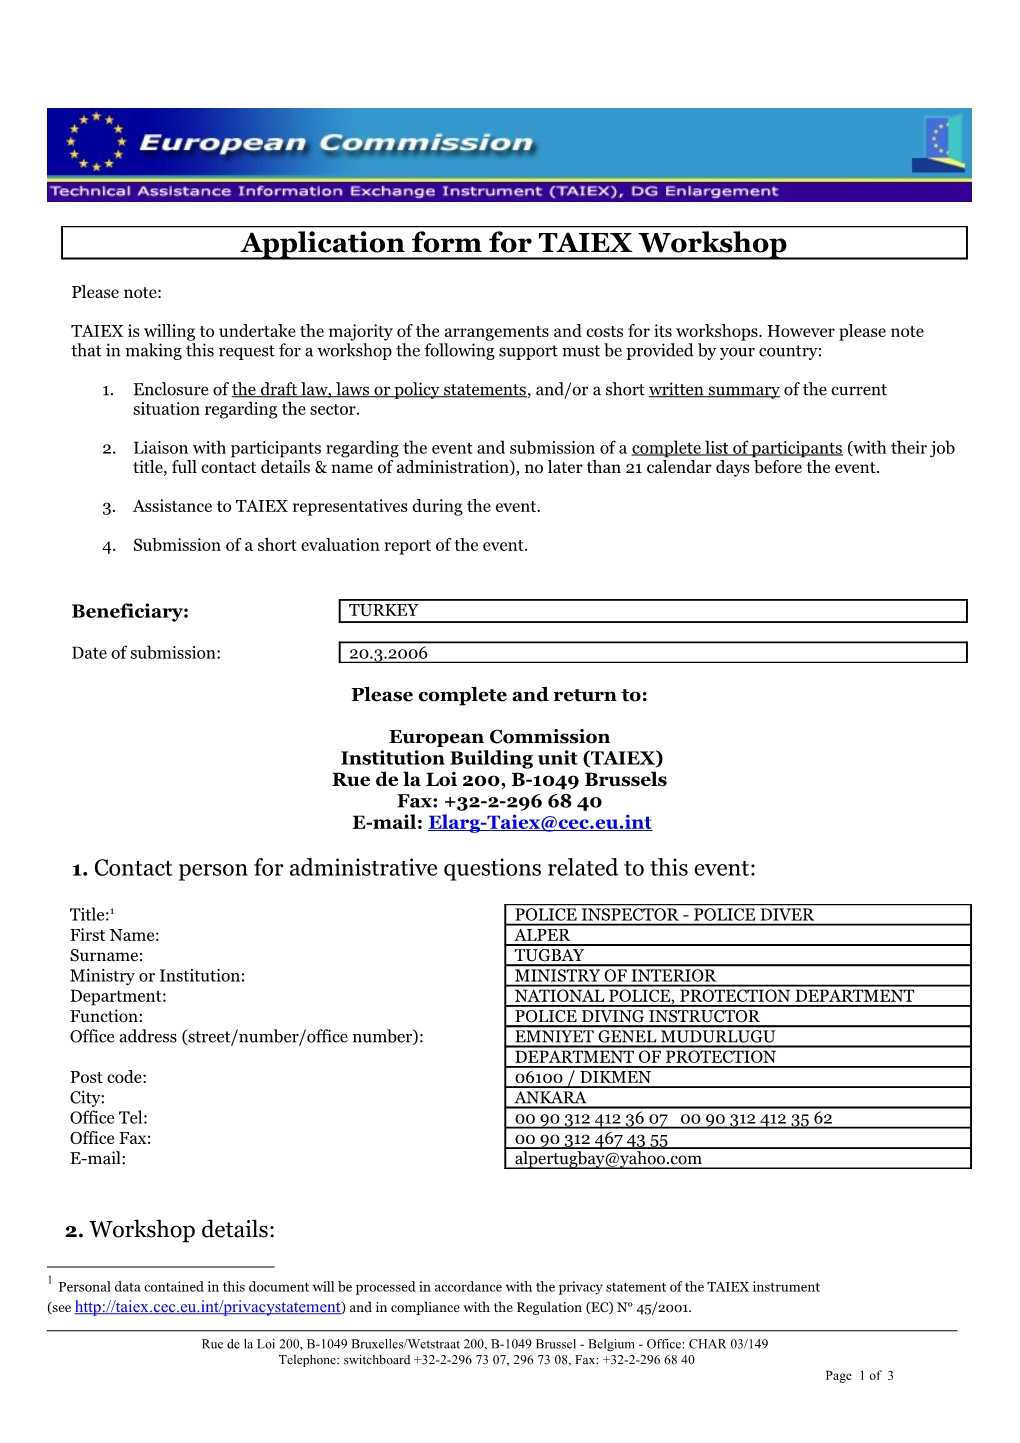 Application Form for TAIEX Workshop